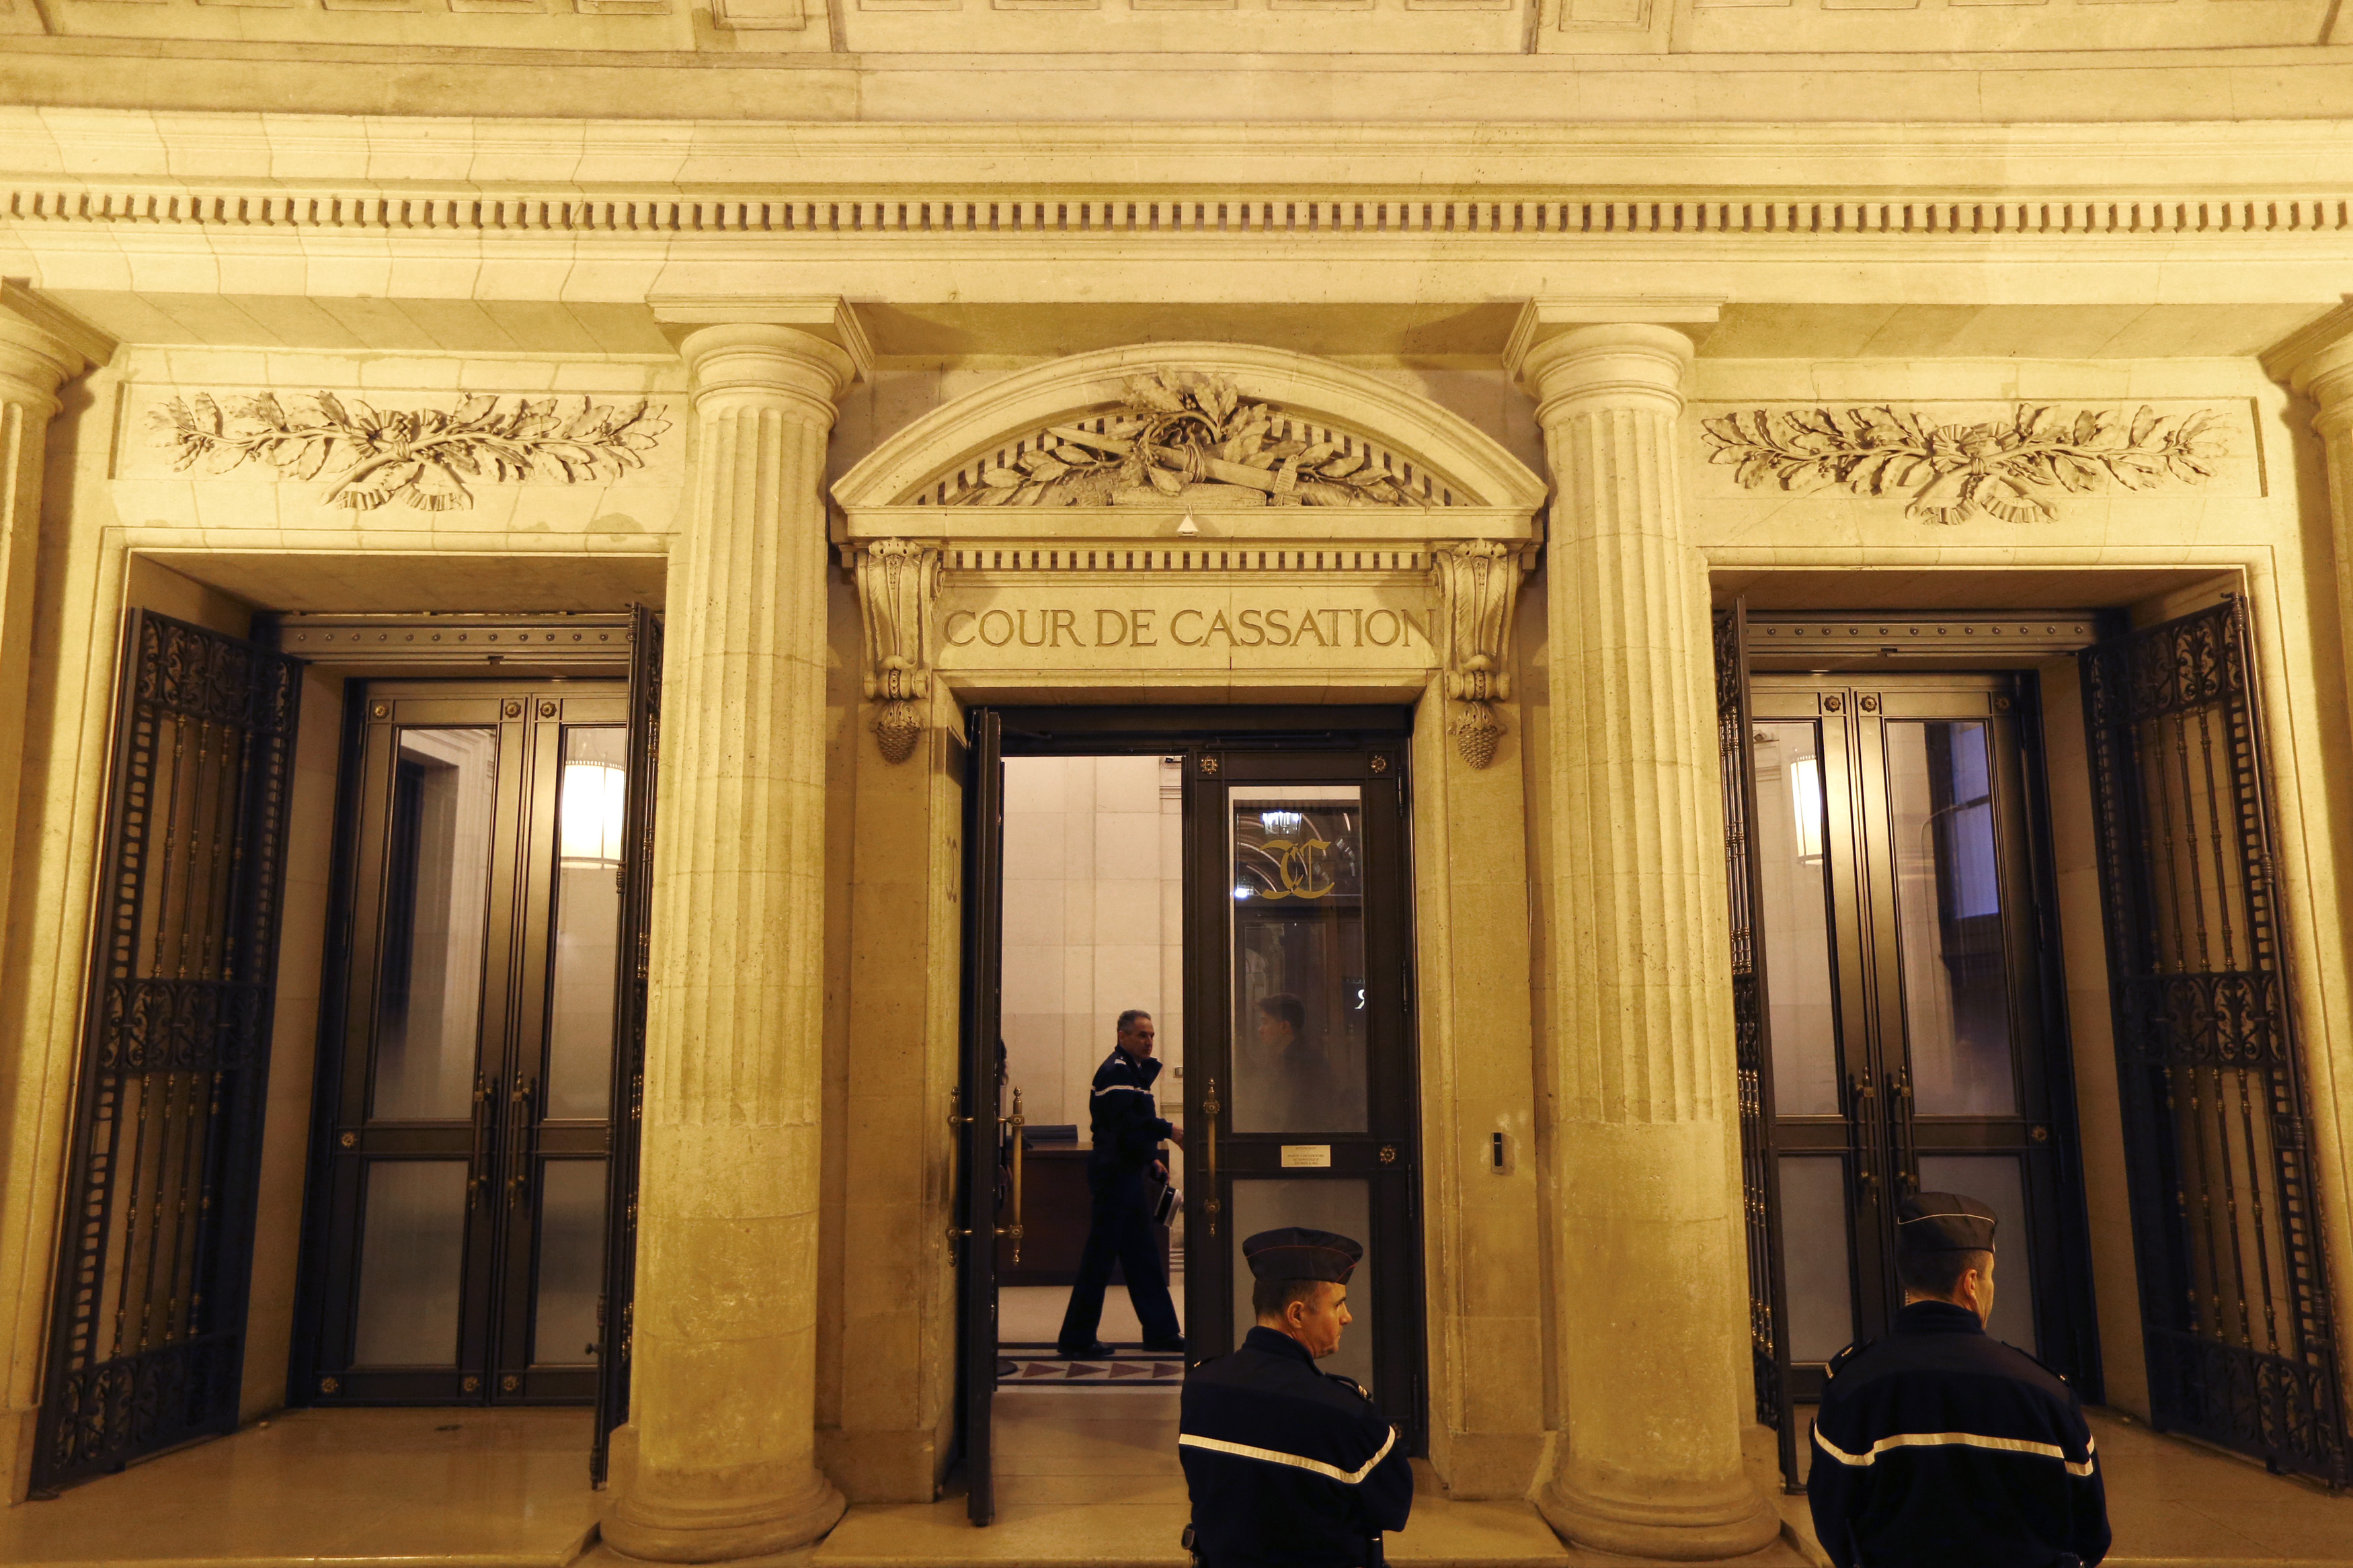 French gendarmes stand in front of France's highest court (Cour de Cassation) in Paris